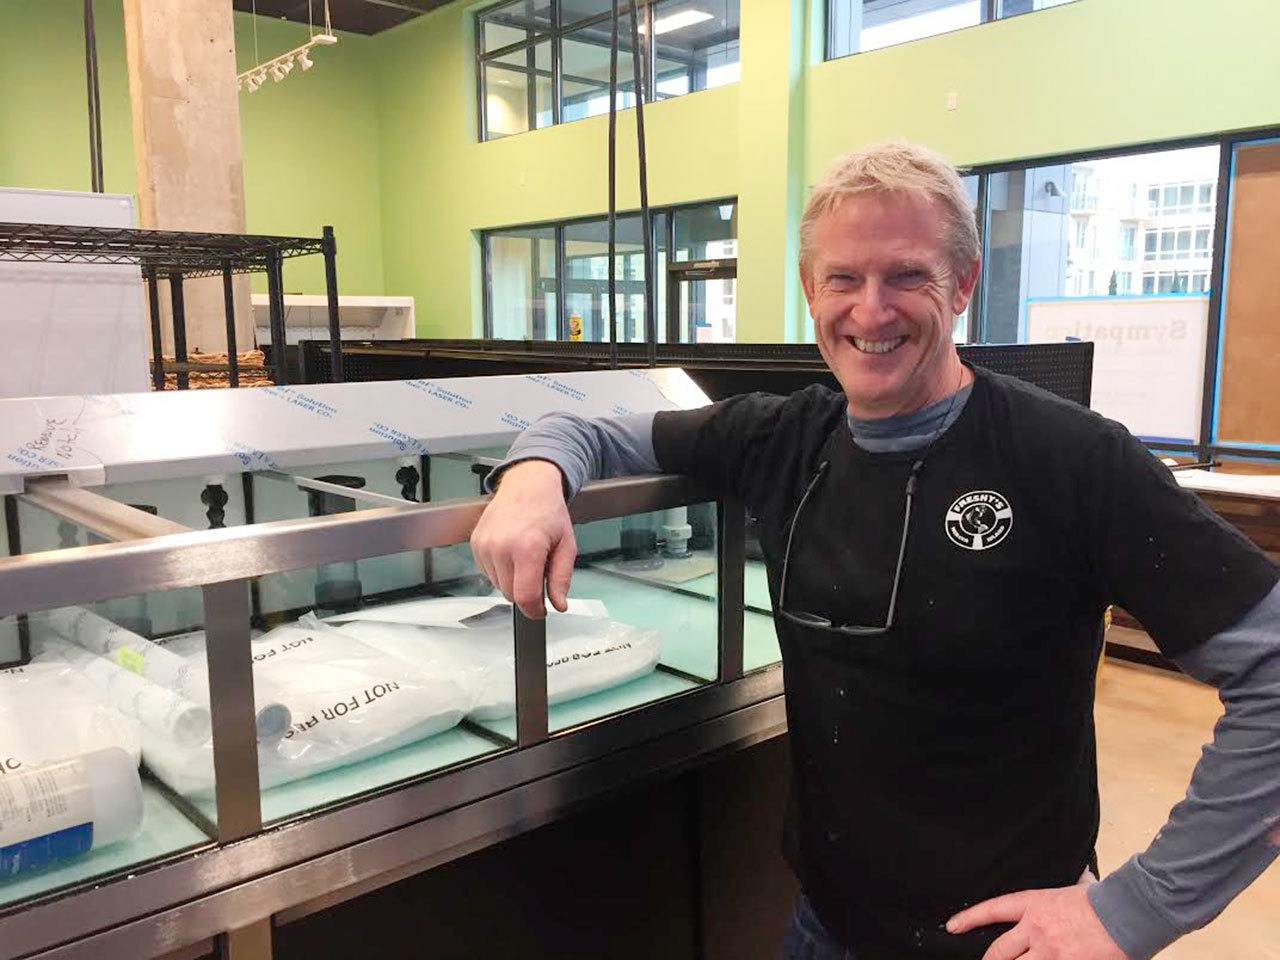 Owner Bryce Caldwell plans to open Freshy’s Local Market on Feb. 9 in the Hadley building. Photo courtesy of Freshy’s Local Market